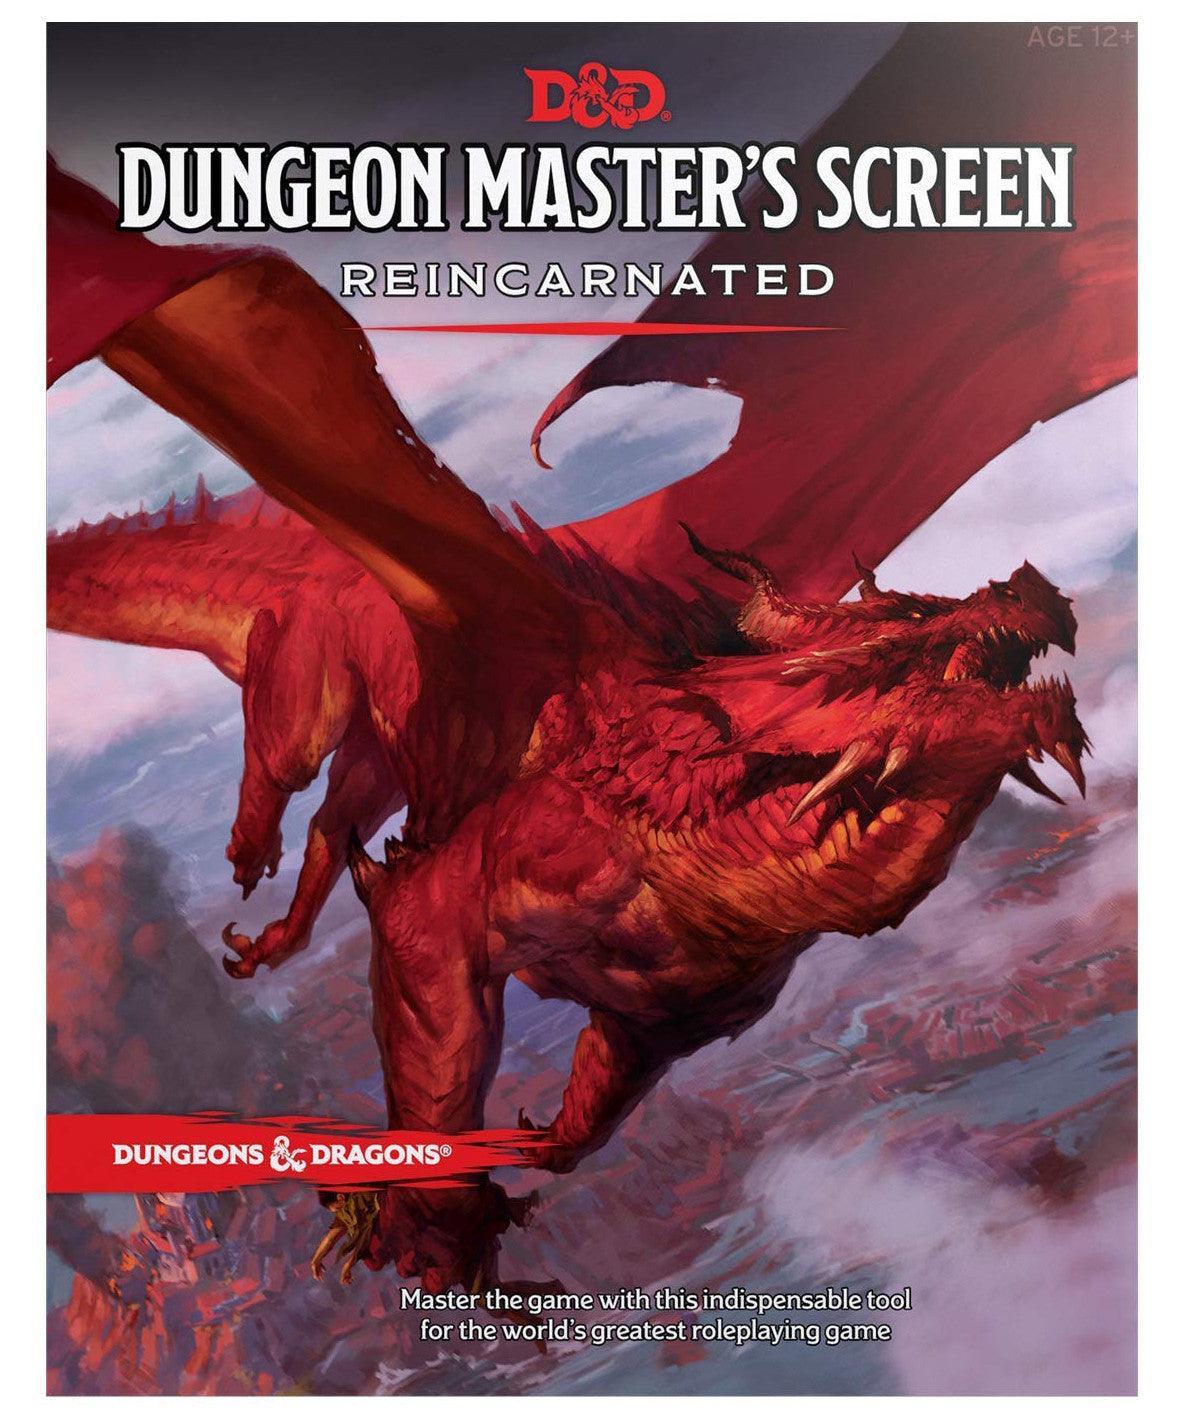 VR-87503 D&D Dungeons & Dragons Dungeon Masters Screen Reincarnated - Wizards of the Coast - Titan Pop Culture